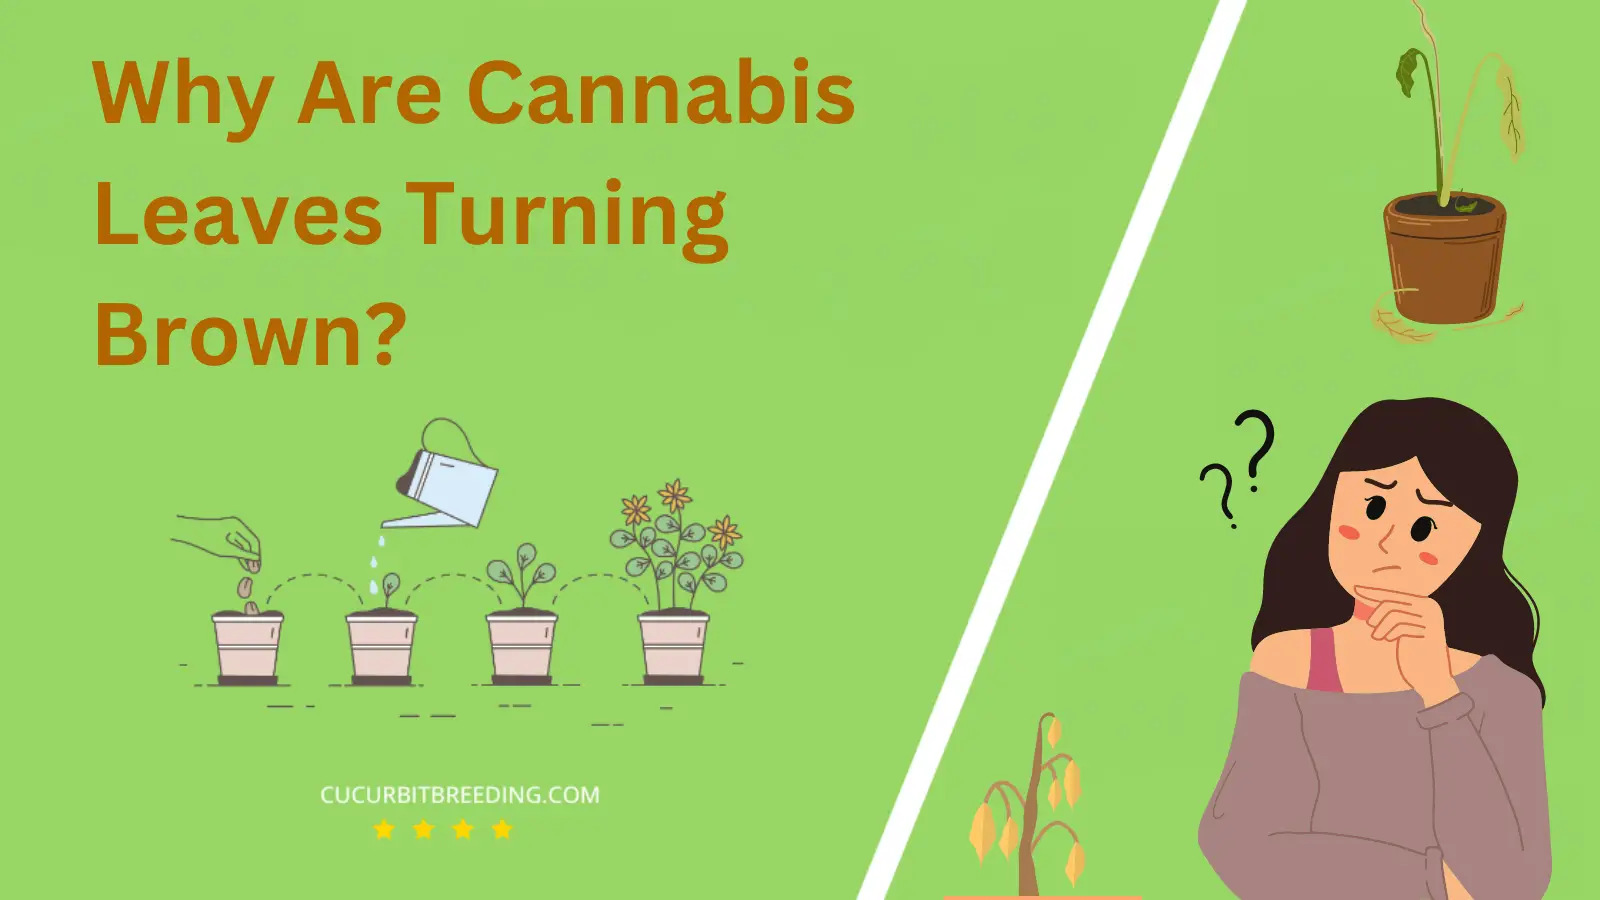 Why Are Cannabis Leaves Turning Brown